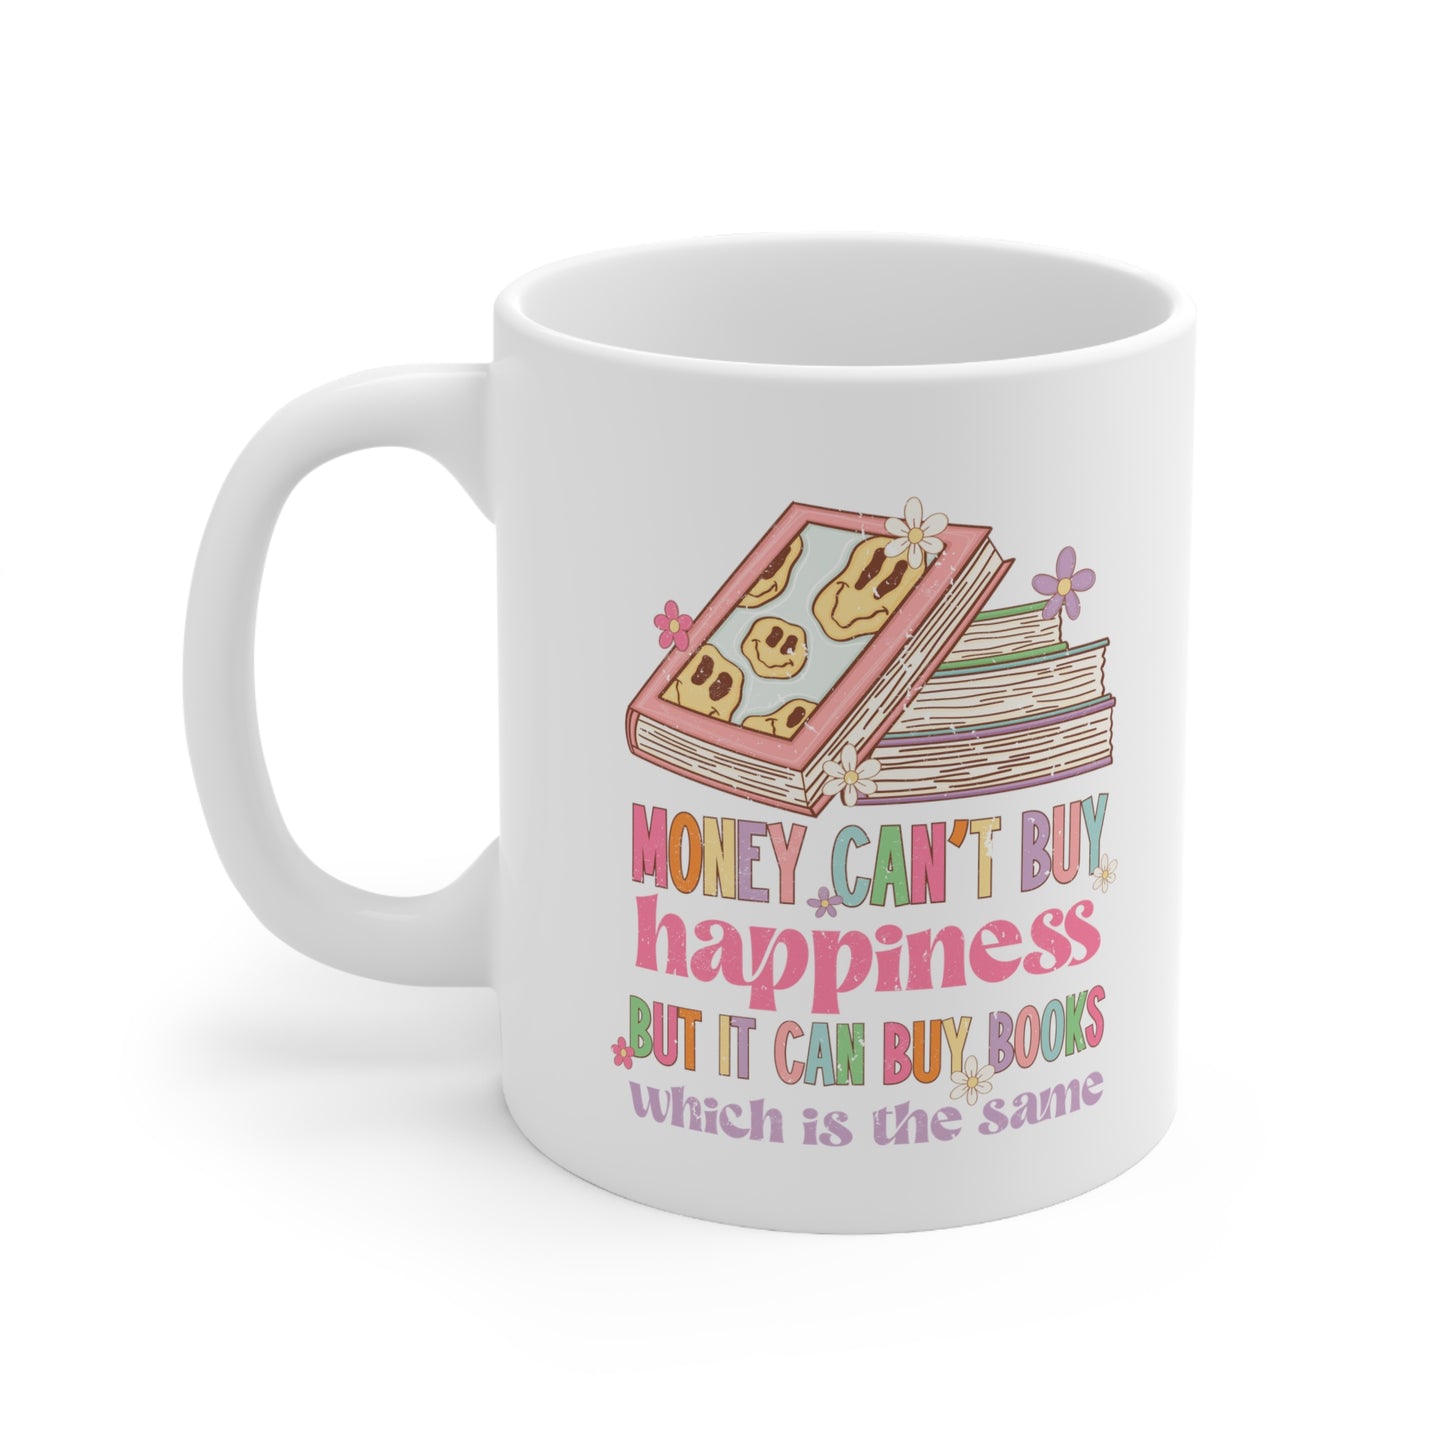 Money Can't Buy Happiness But It Can By Books Mug, Booktok, Librarian Gift, Book Lover